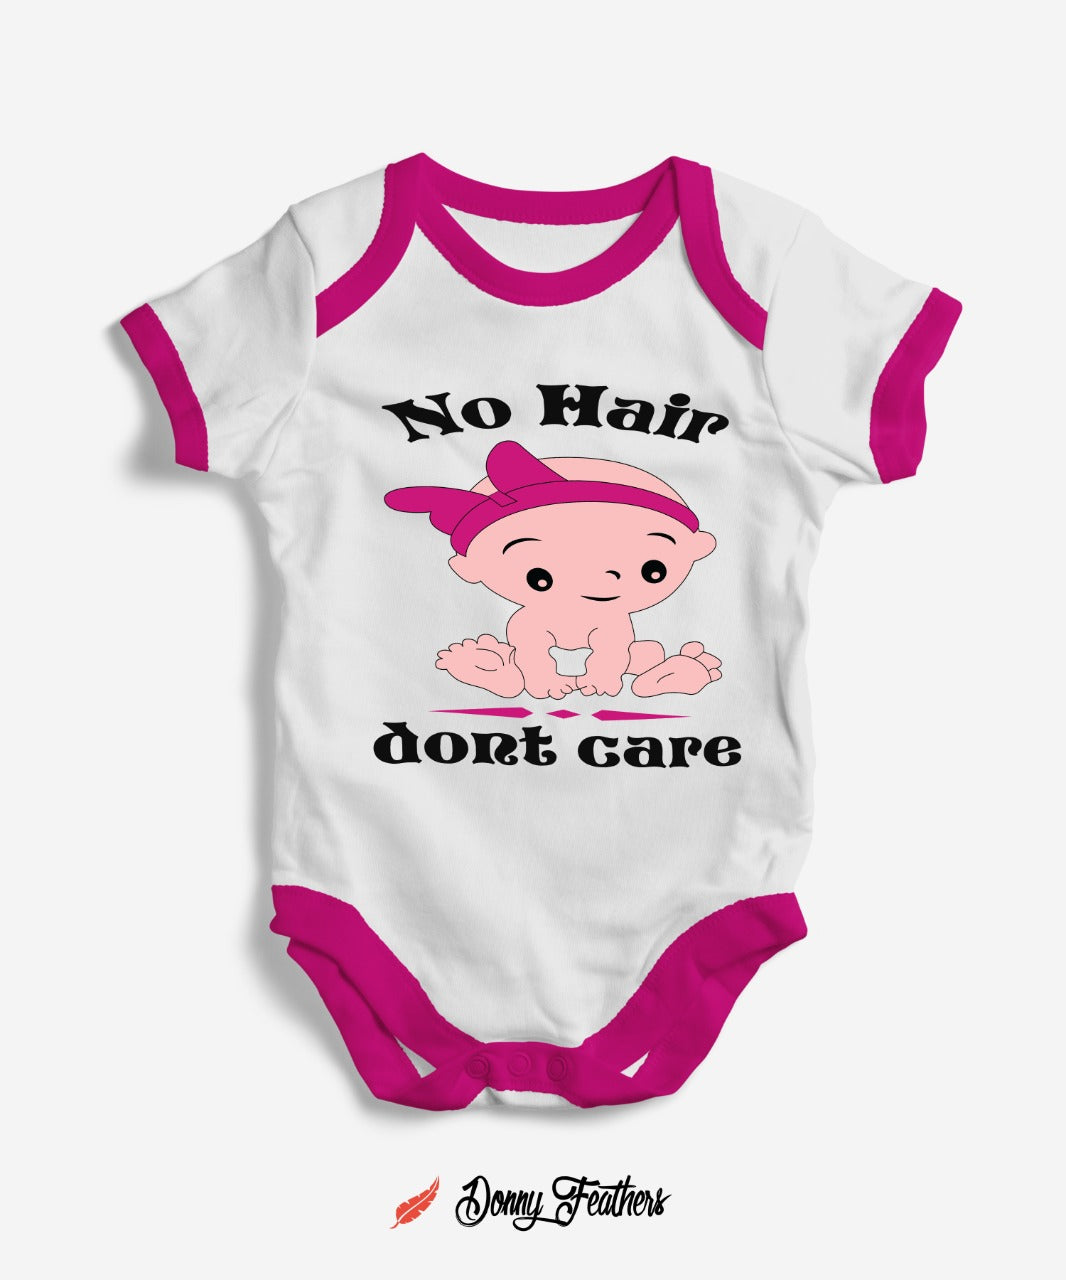 Baby Boys Rompers | No Hair Don't Care Baby Romper (White & Pink) By: Donny Feathers